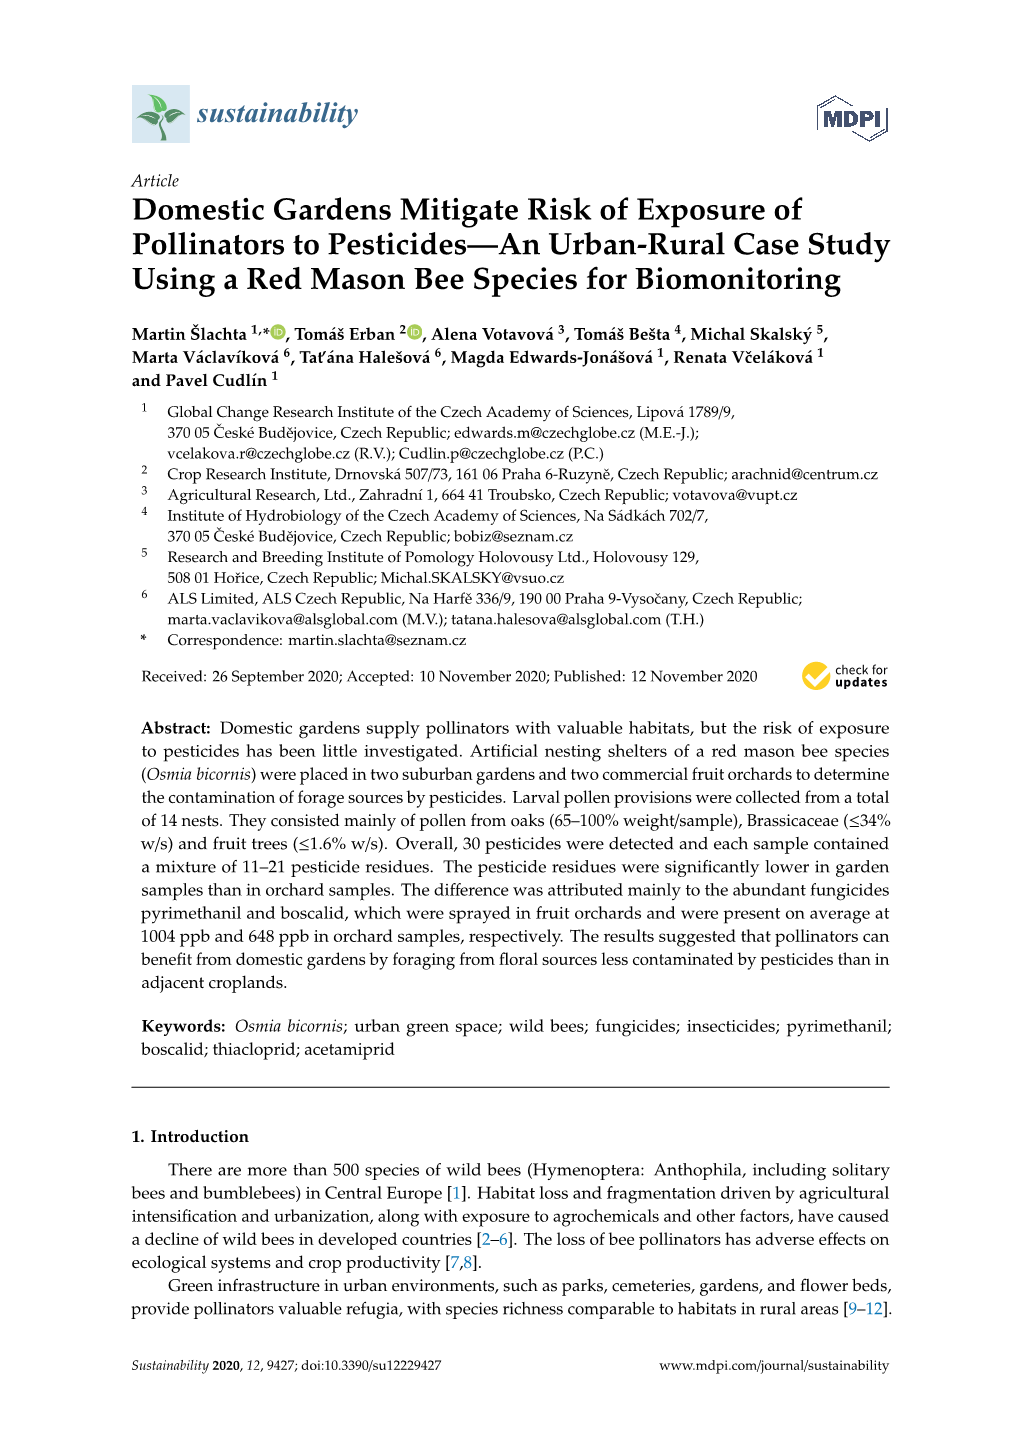 Domestic Gardens Mitigate Risk of Exposure of Pollinators to Pesticides—An Urban-Rural Case Study Using a Red Mason Bee Species for Biomonitoring